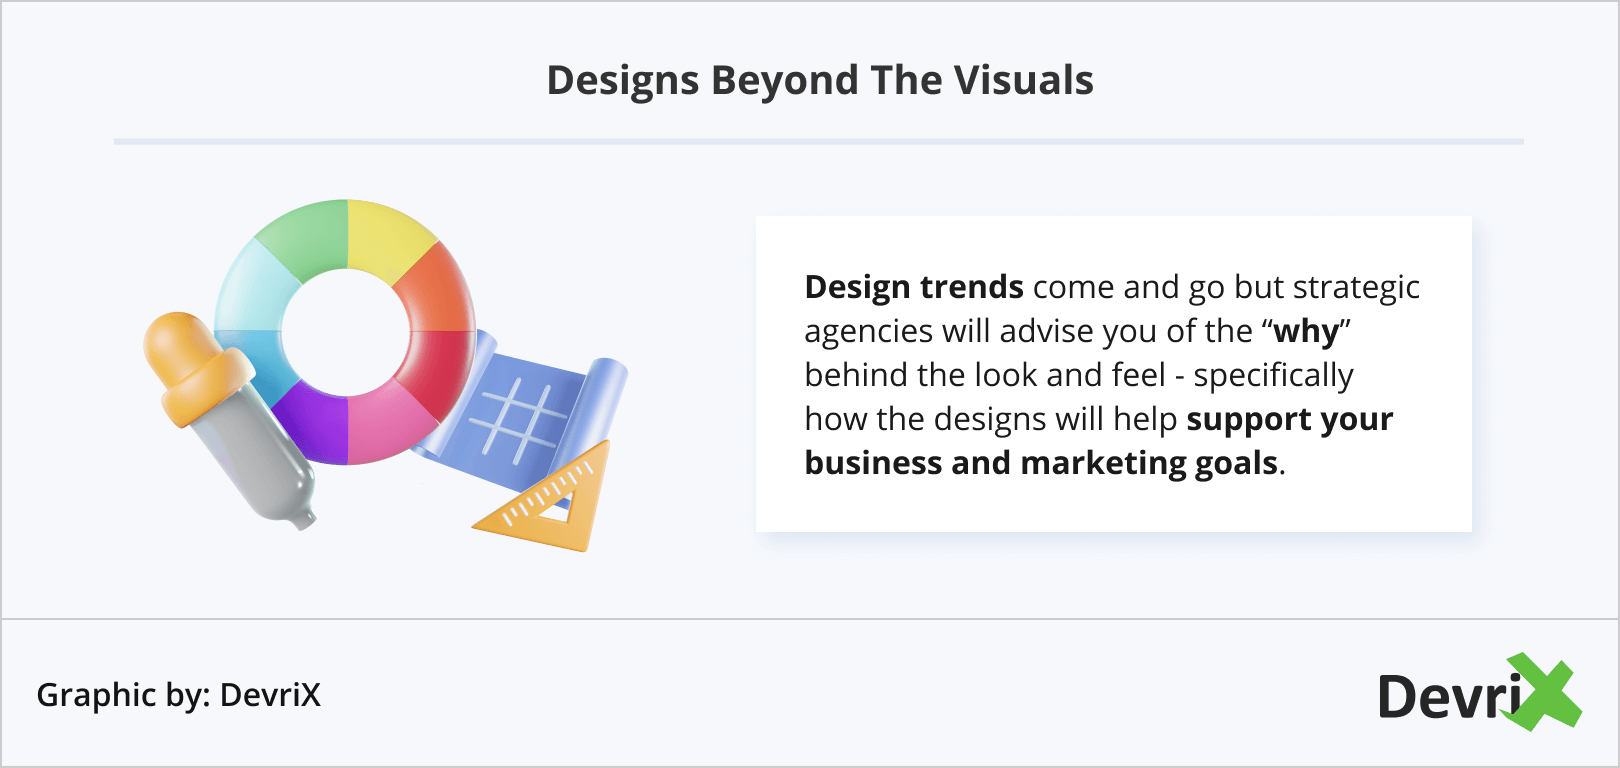 Designs Beyond The Visuals